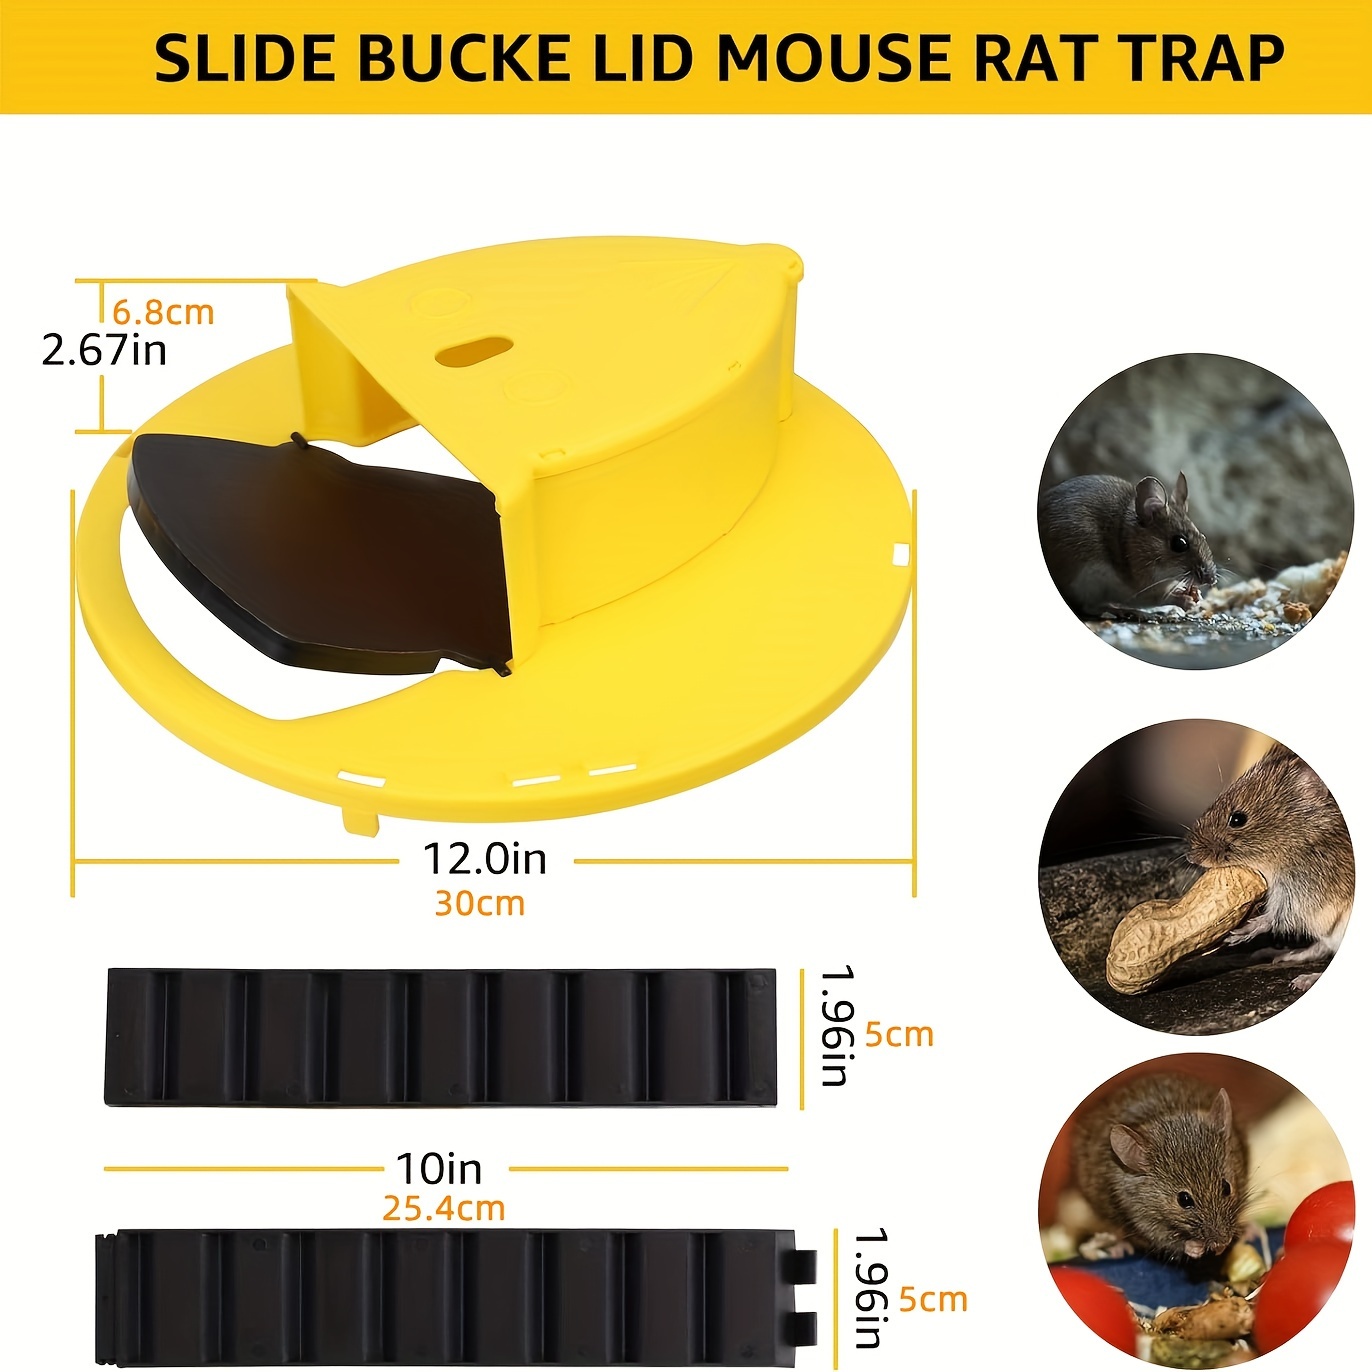 2 Piece Slide Bucket Lid Mouse/Rat Trap with Ramp, Auto Reset